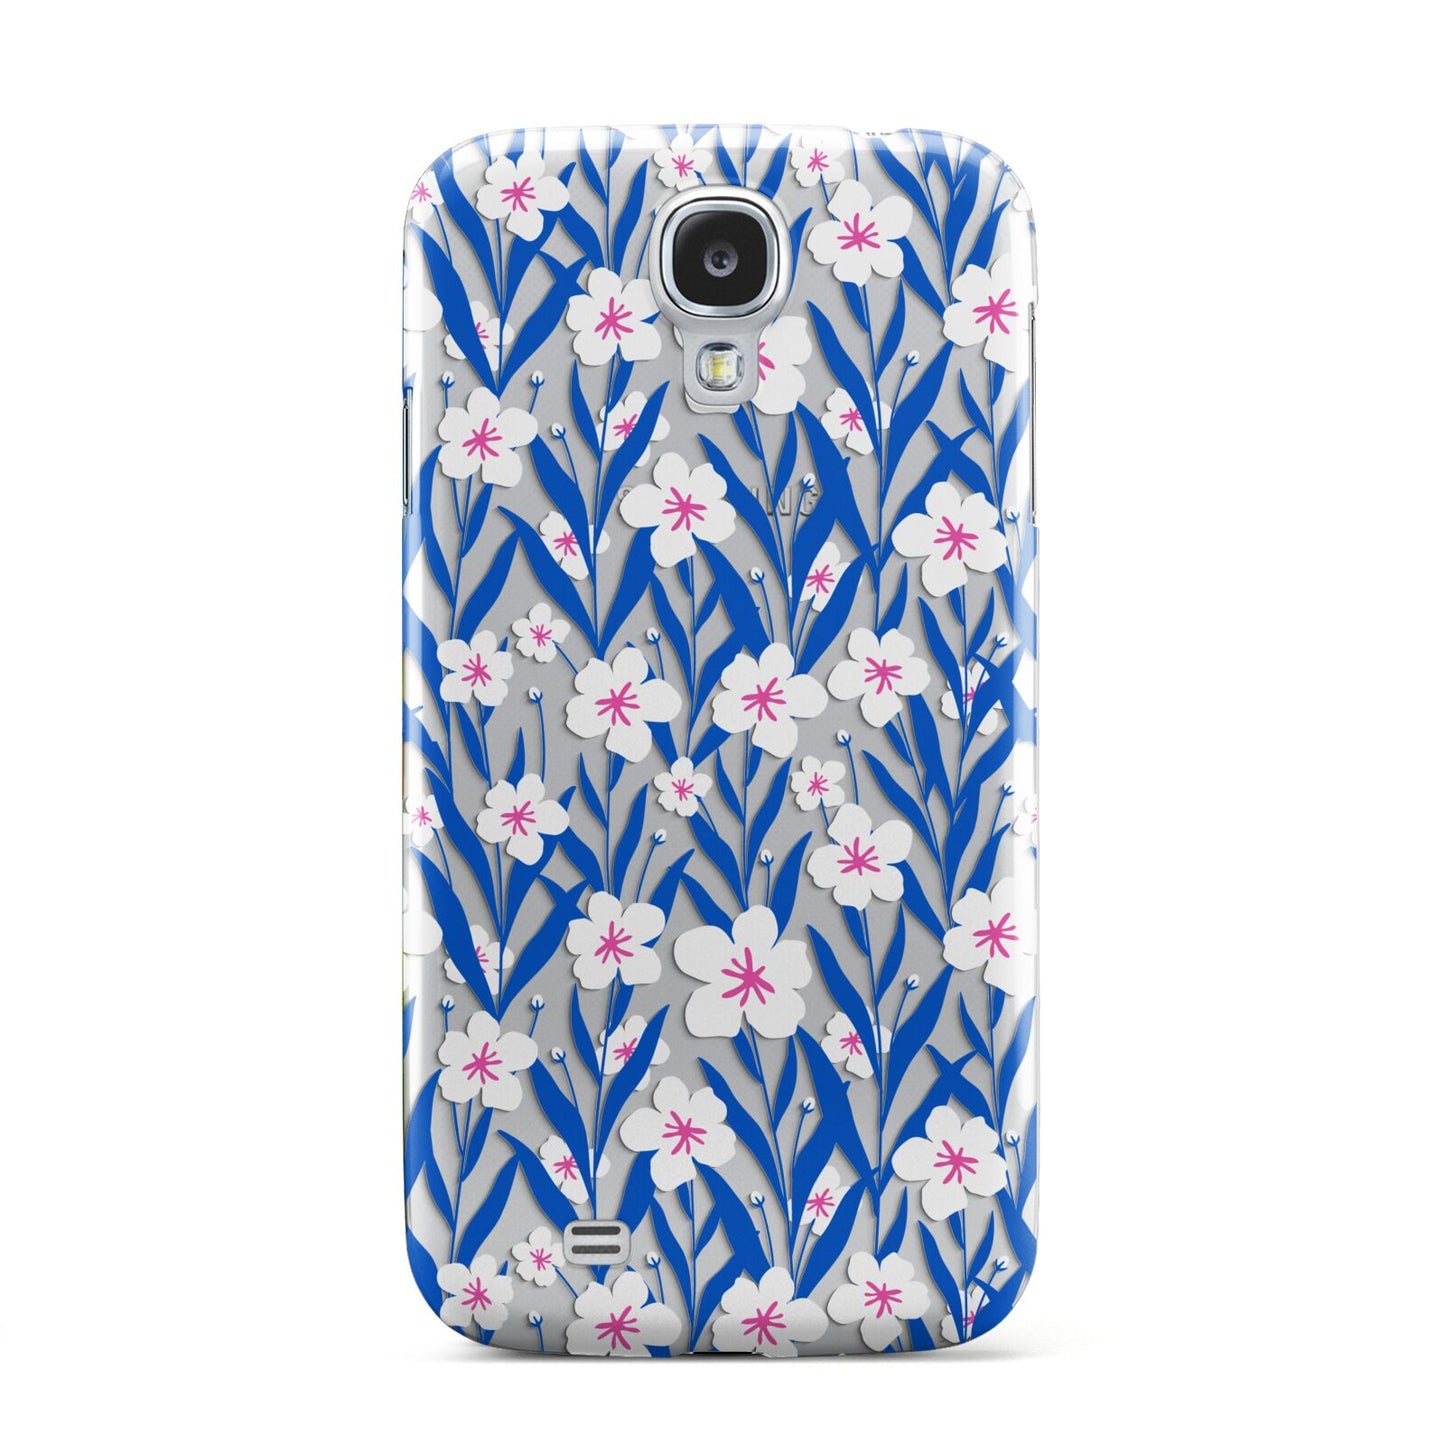 Blue and White Flowers Samsung Galaxy S4 Case